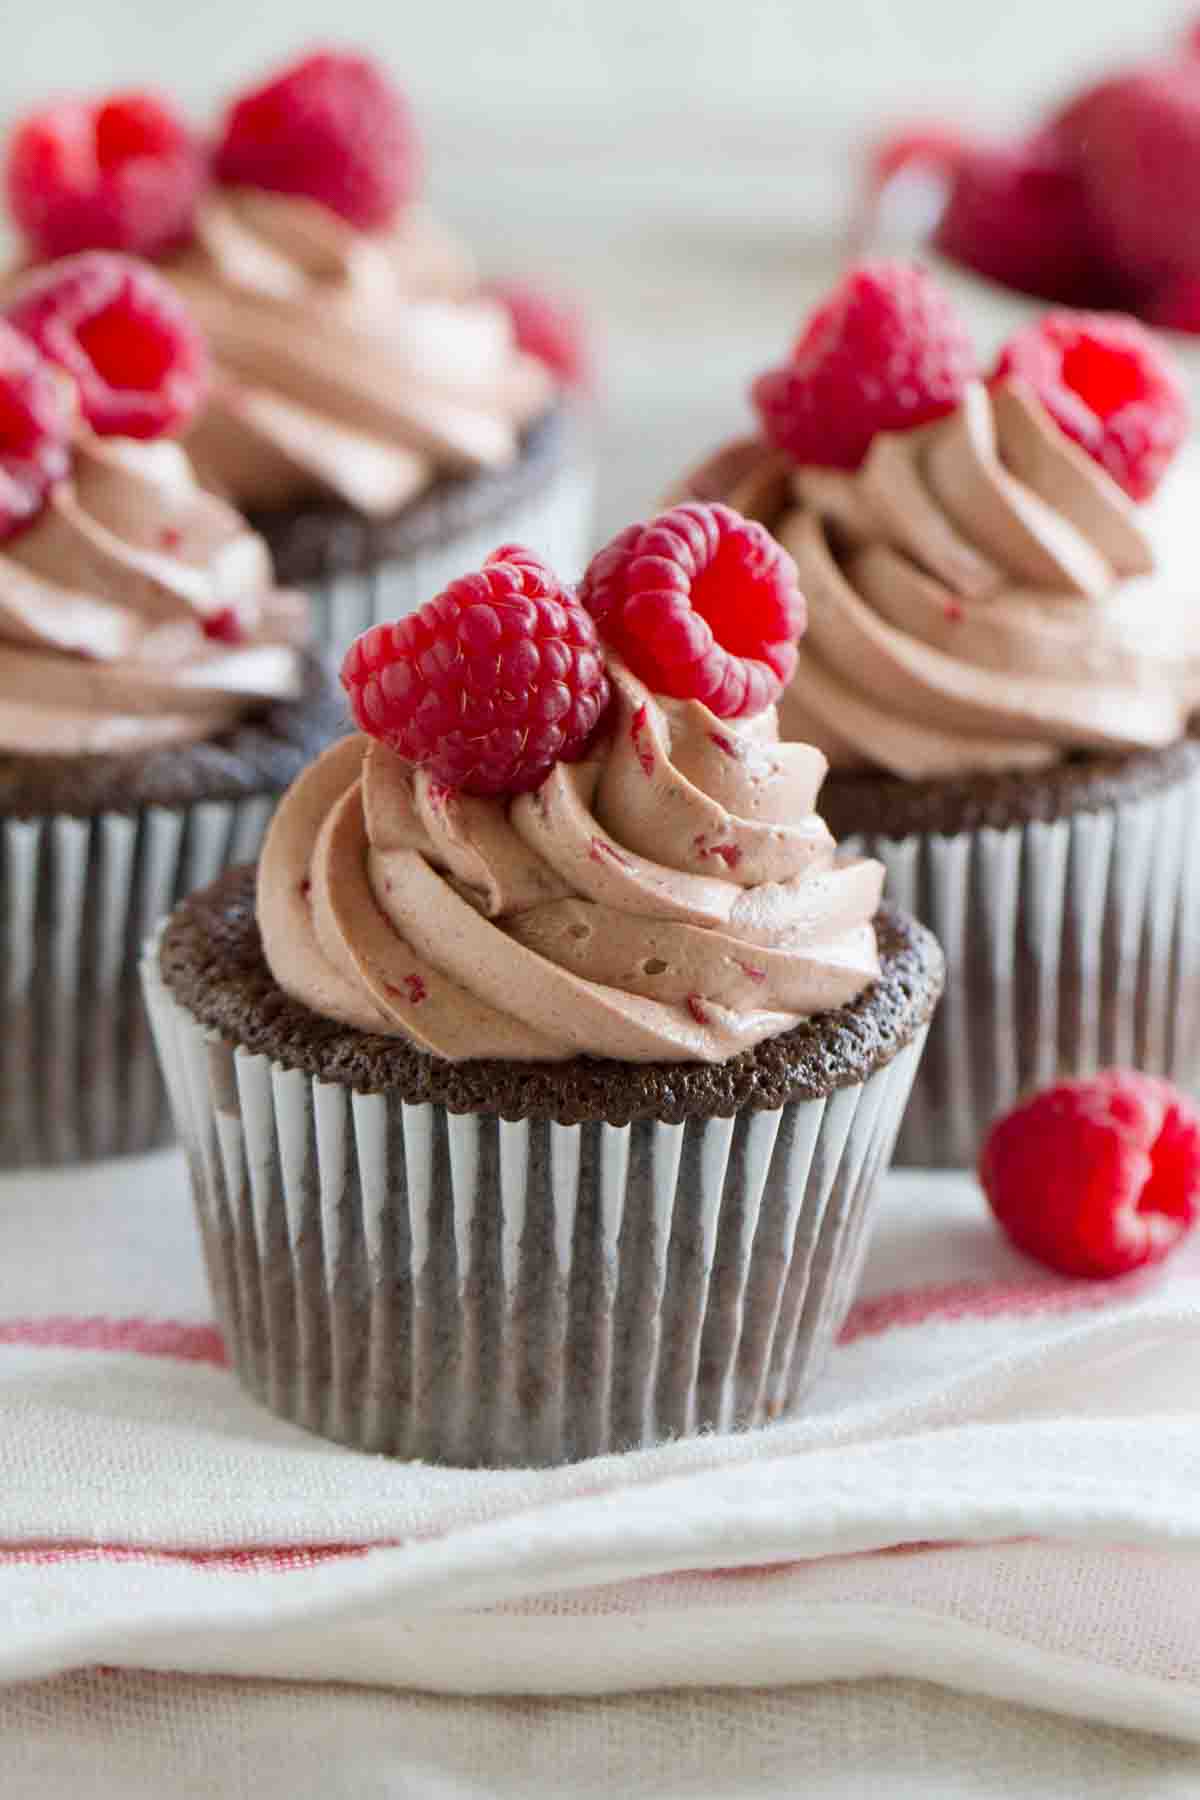 Chocolate Raspberry Buttercream topped Chocolate cupcake with raspberry filling.